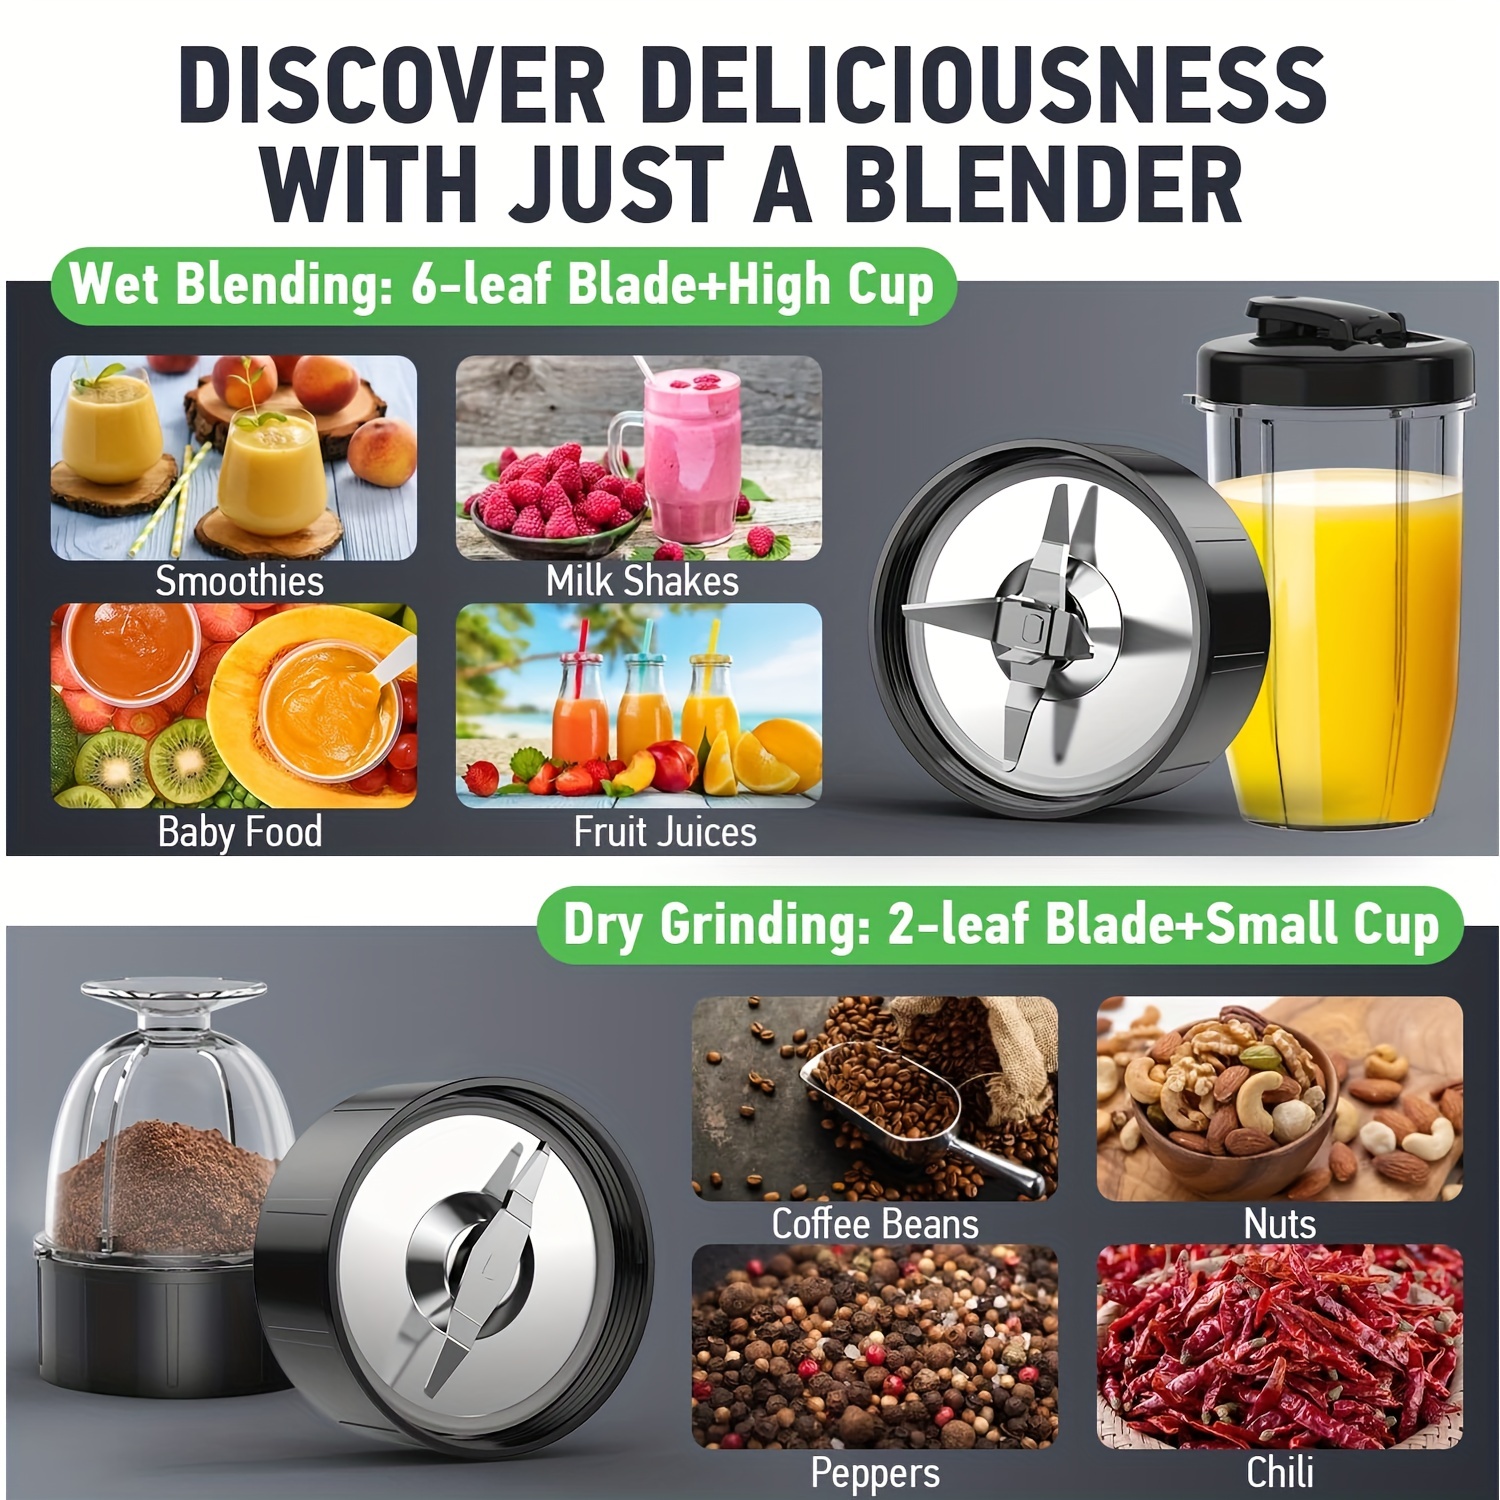 KOIOS Blender for Shakes and Smoothies – Olivia Brands